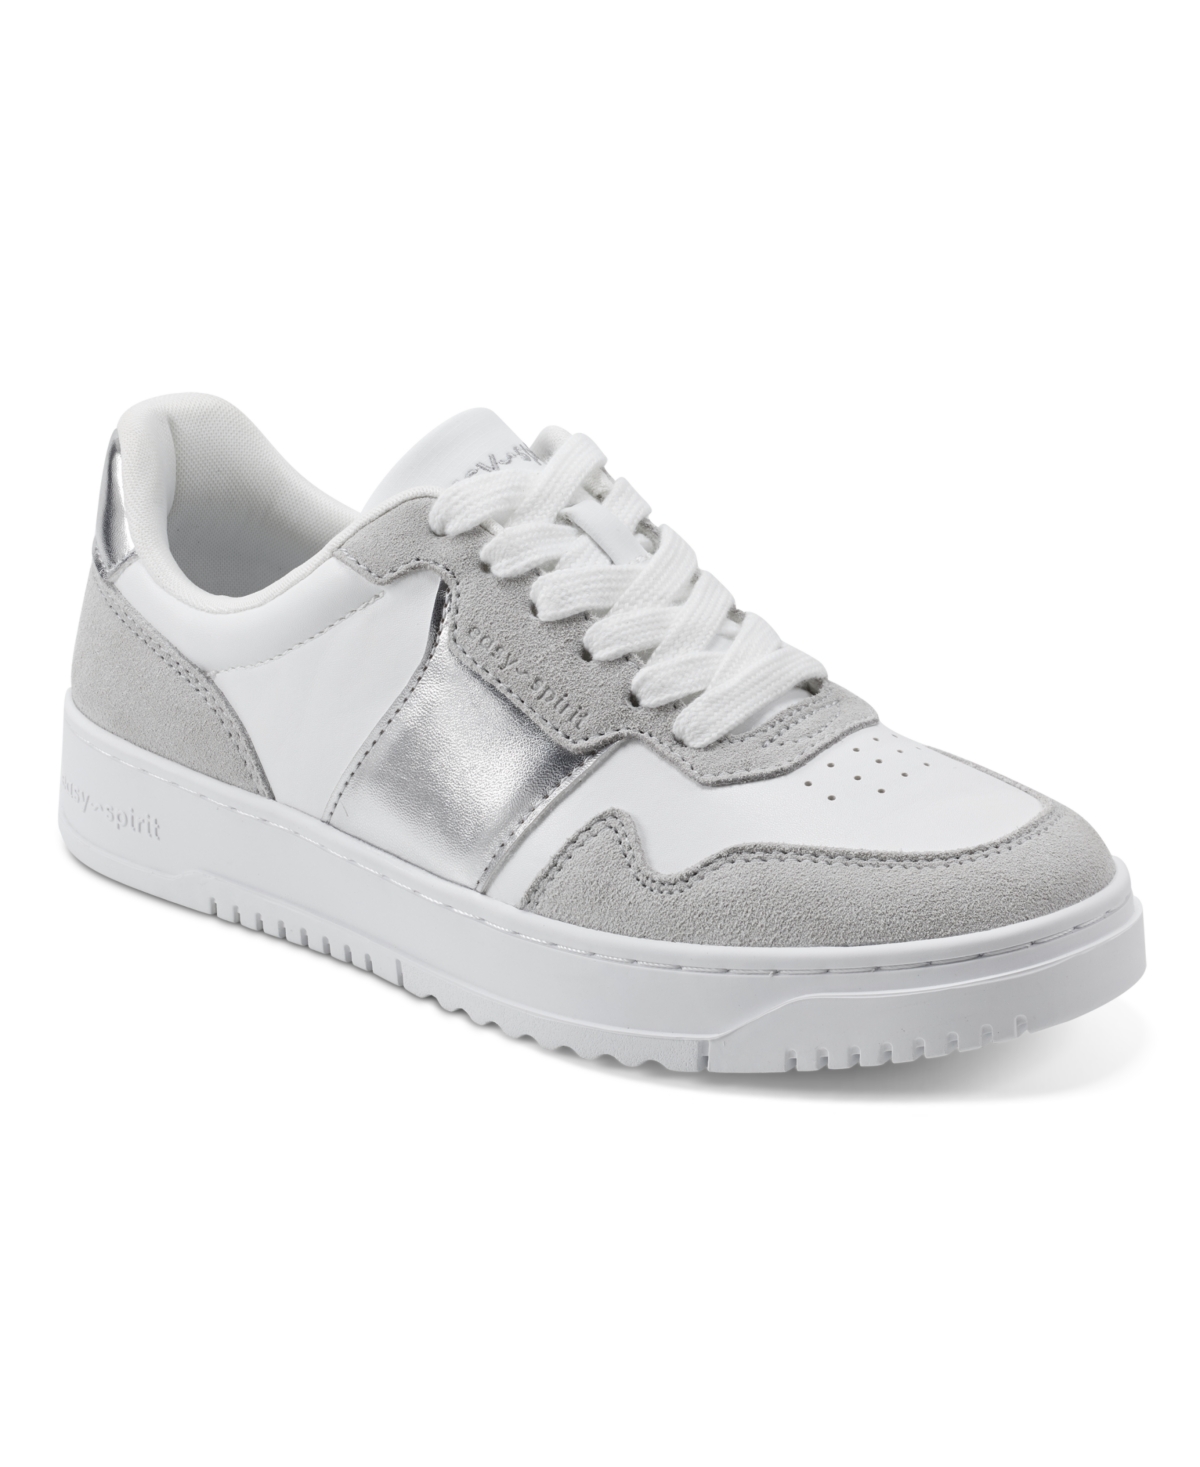 Women's Merci Round Toe Casual Lace-Up Sneakers - White